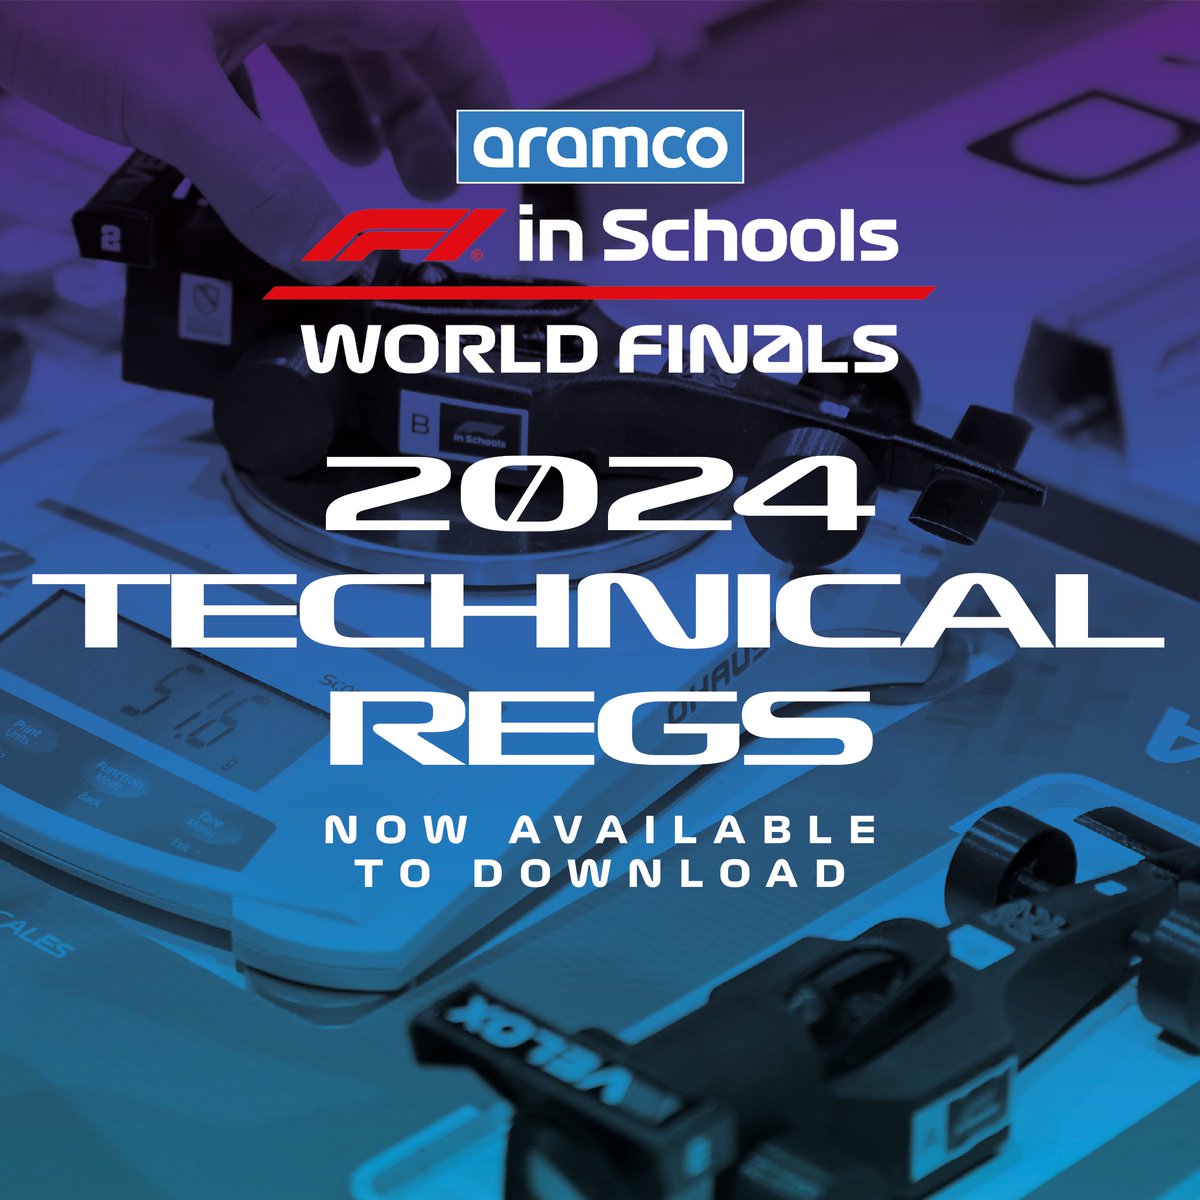 📣 IT’S TIME! 📣 The technical regulations for this year’s @aramco F1 in Schools World Finals are OUT, and now available to download at ow.ly/kfjZ50QAZZ0 So if you’ve got your eye on making it to the global stage of the competition, find out what’s in store for 2024 👀